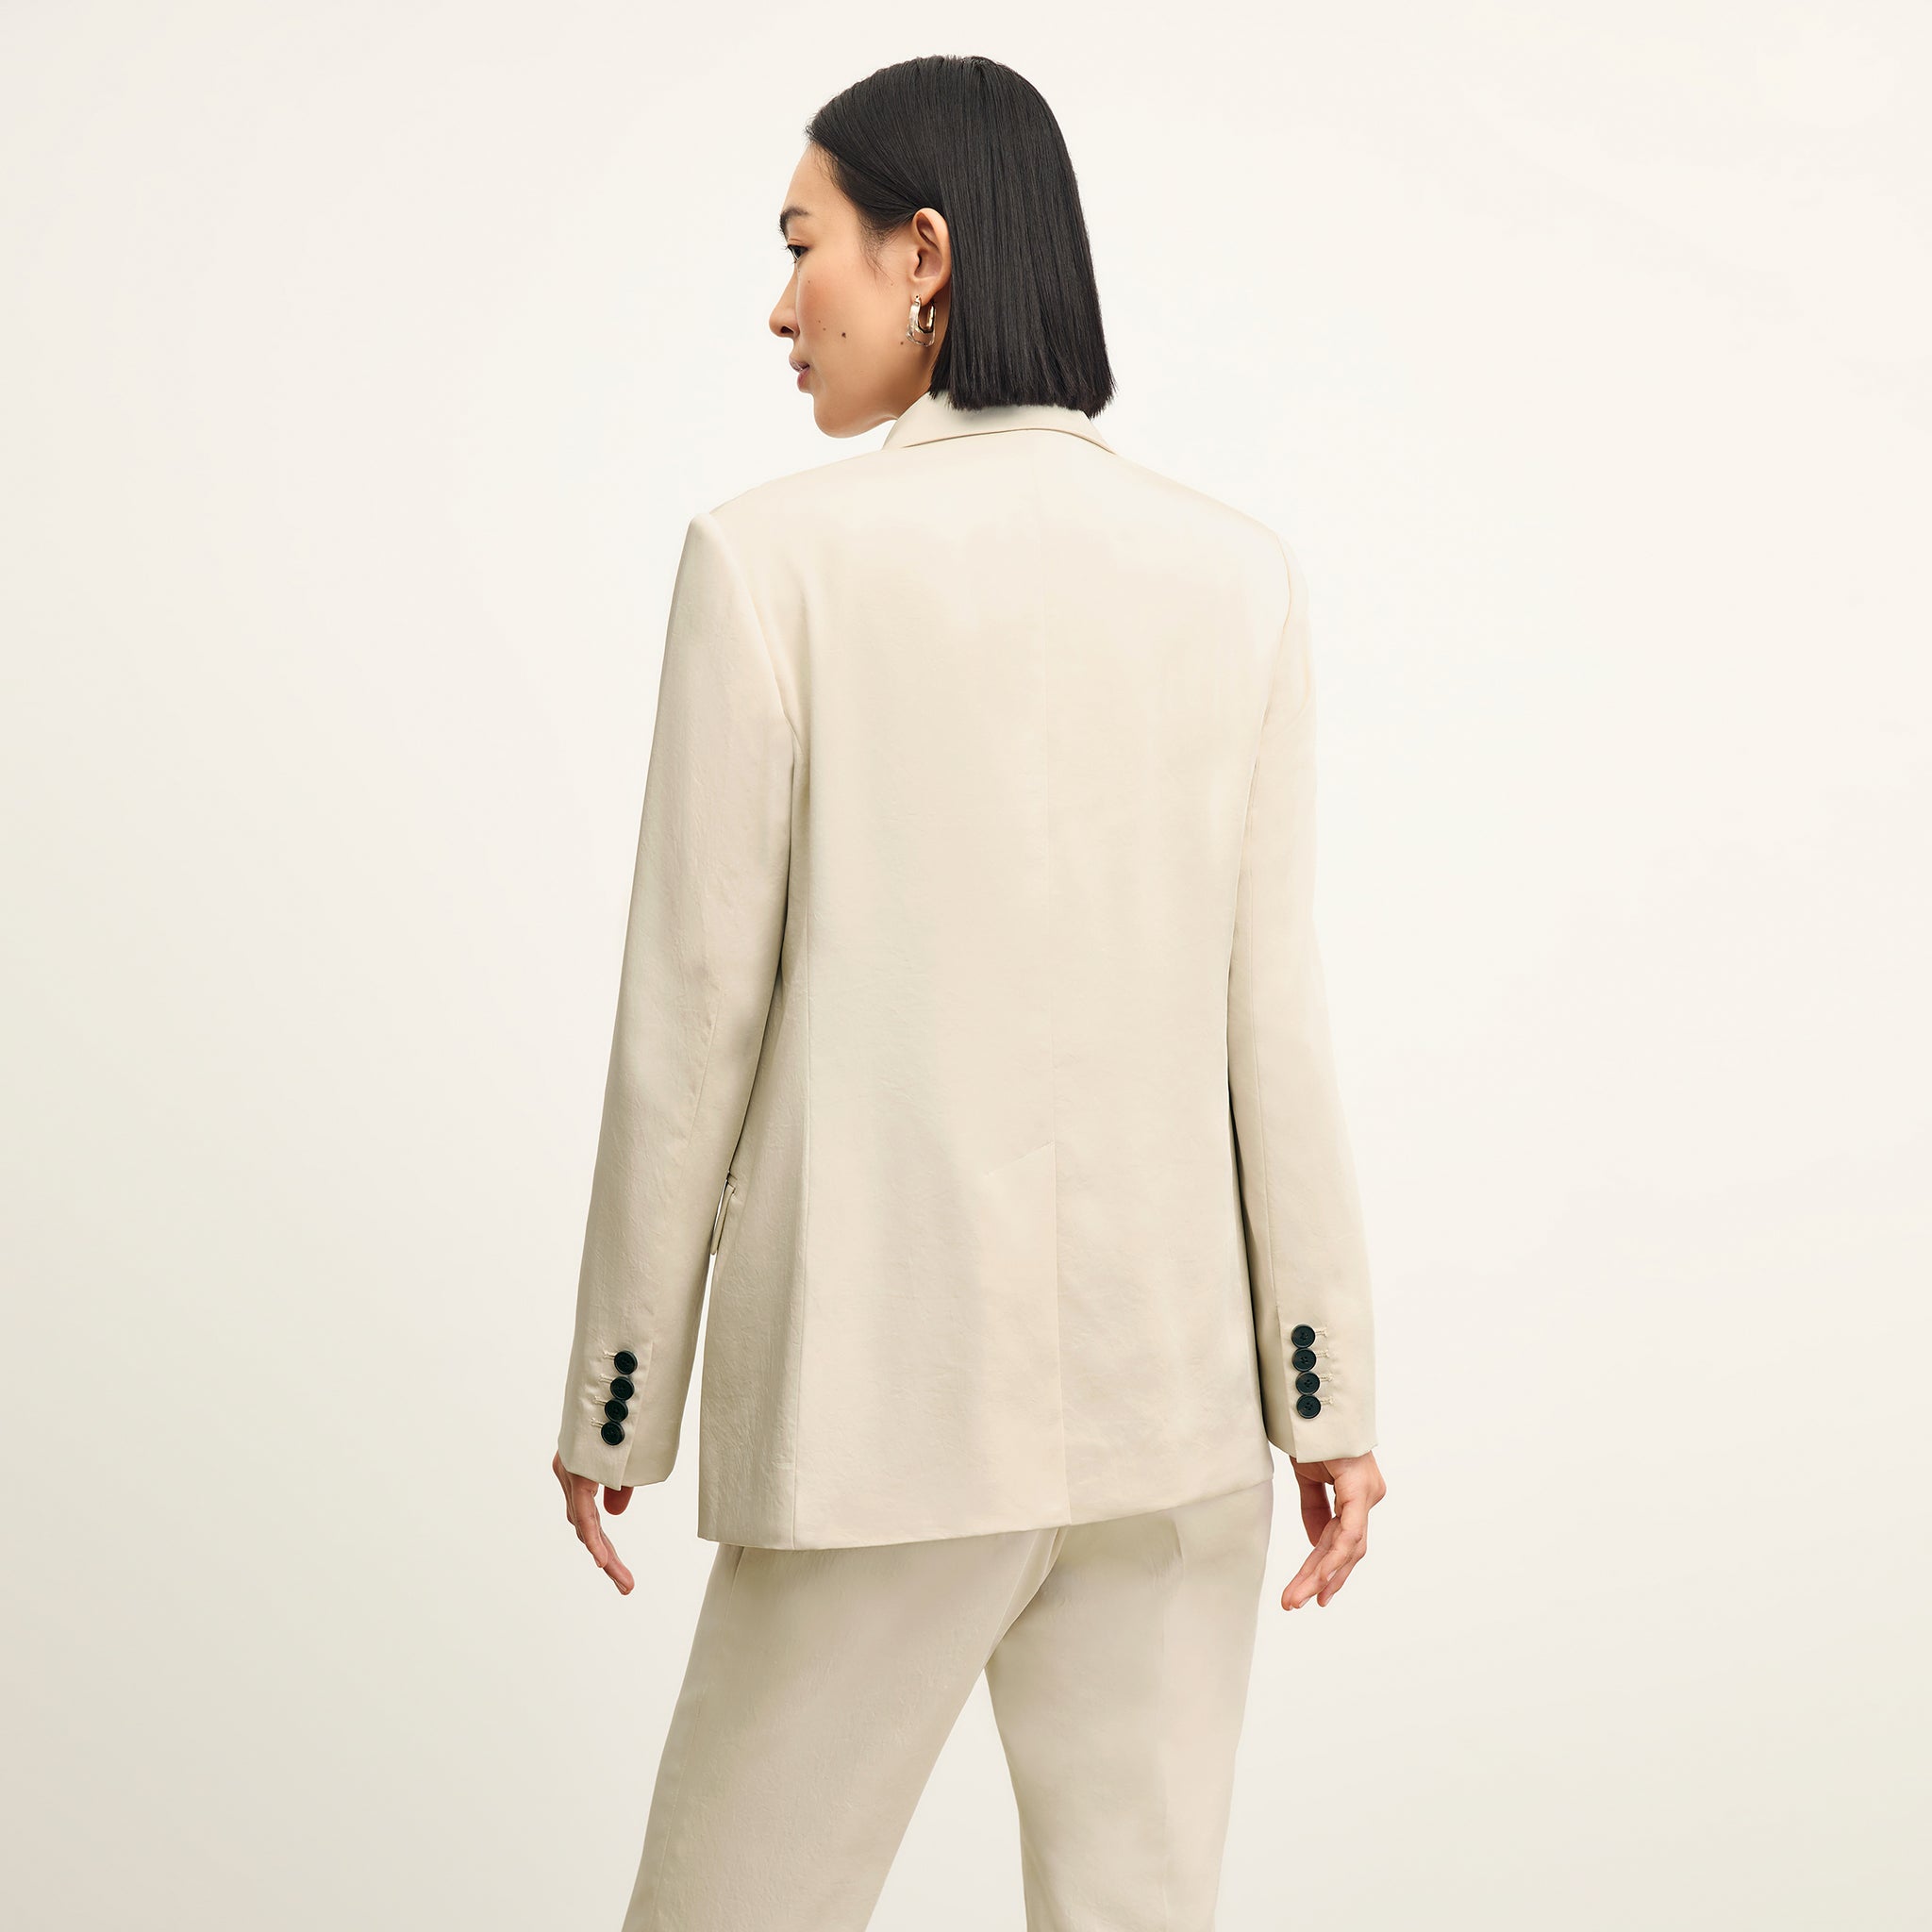 back image of a woman wearing the smith pant in champagne